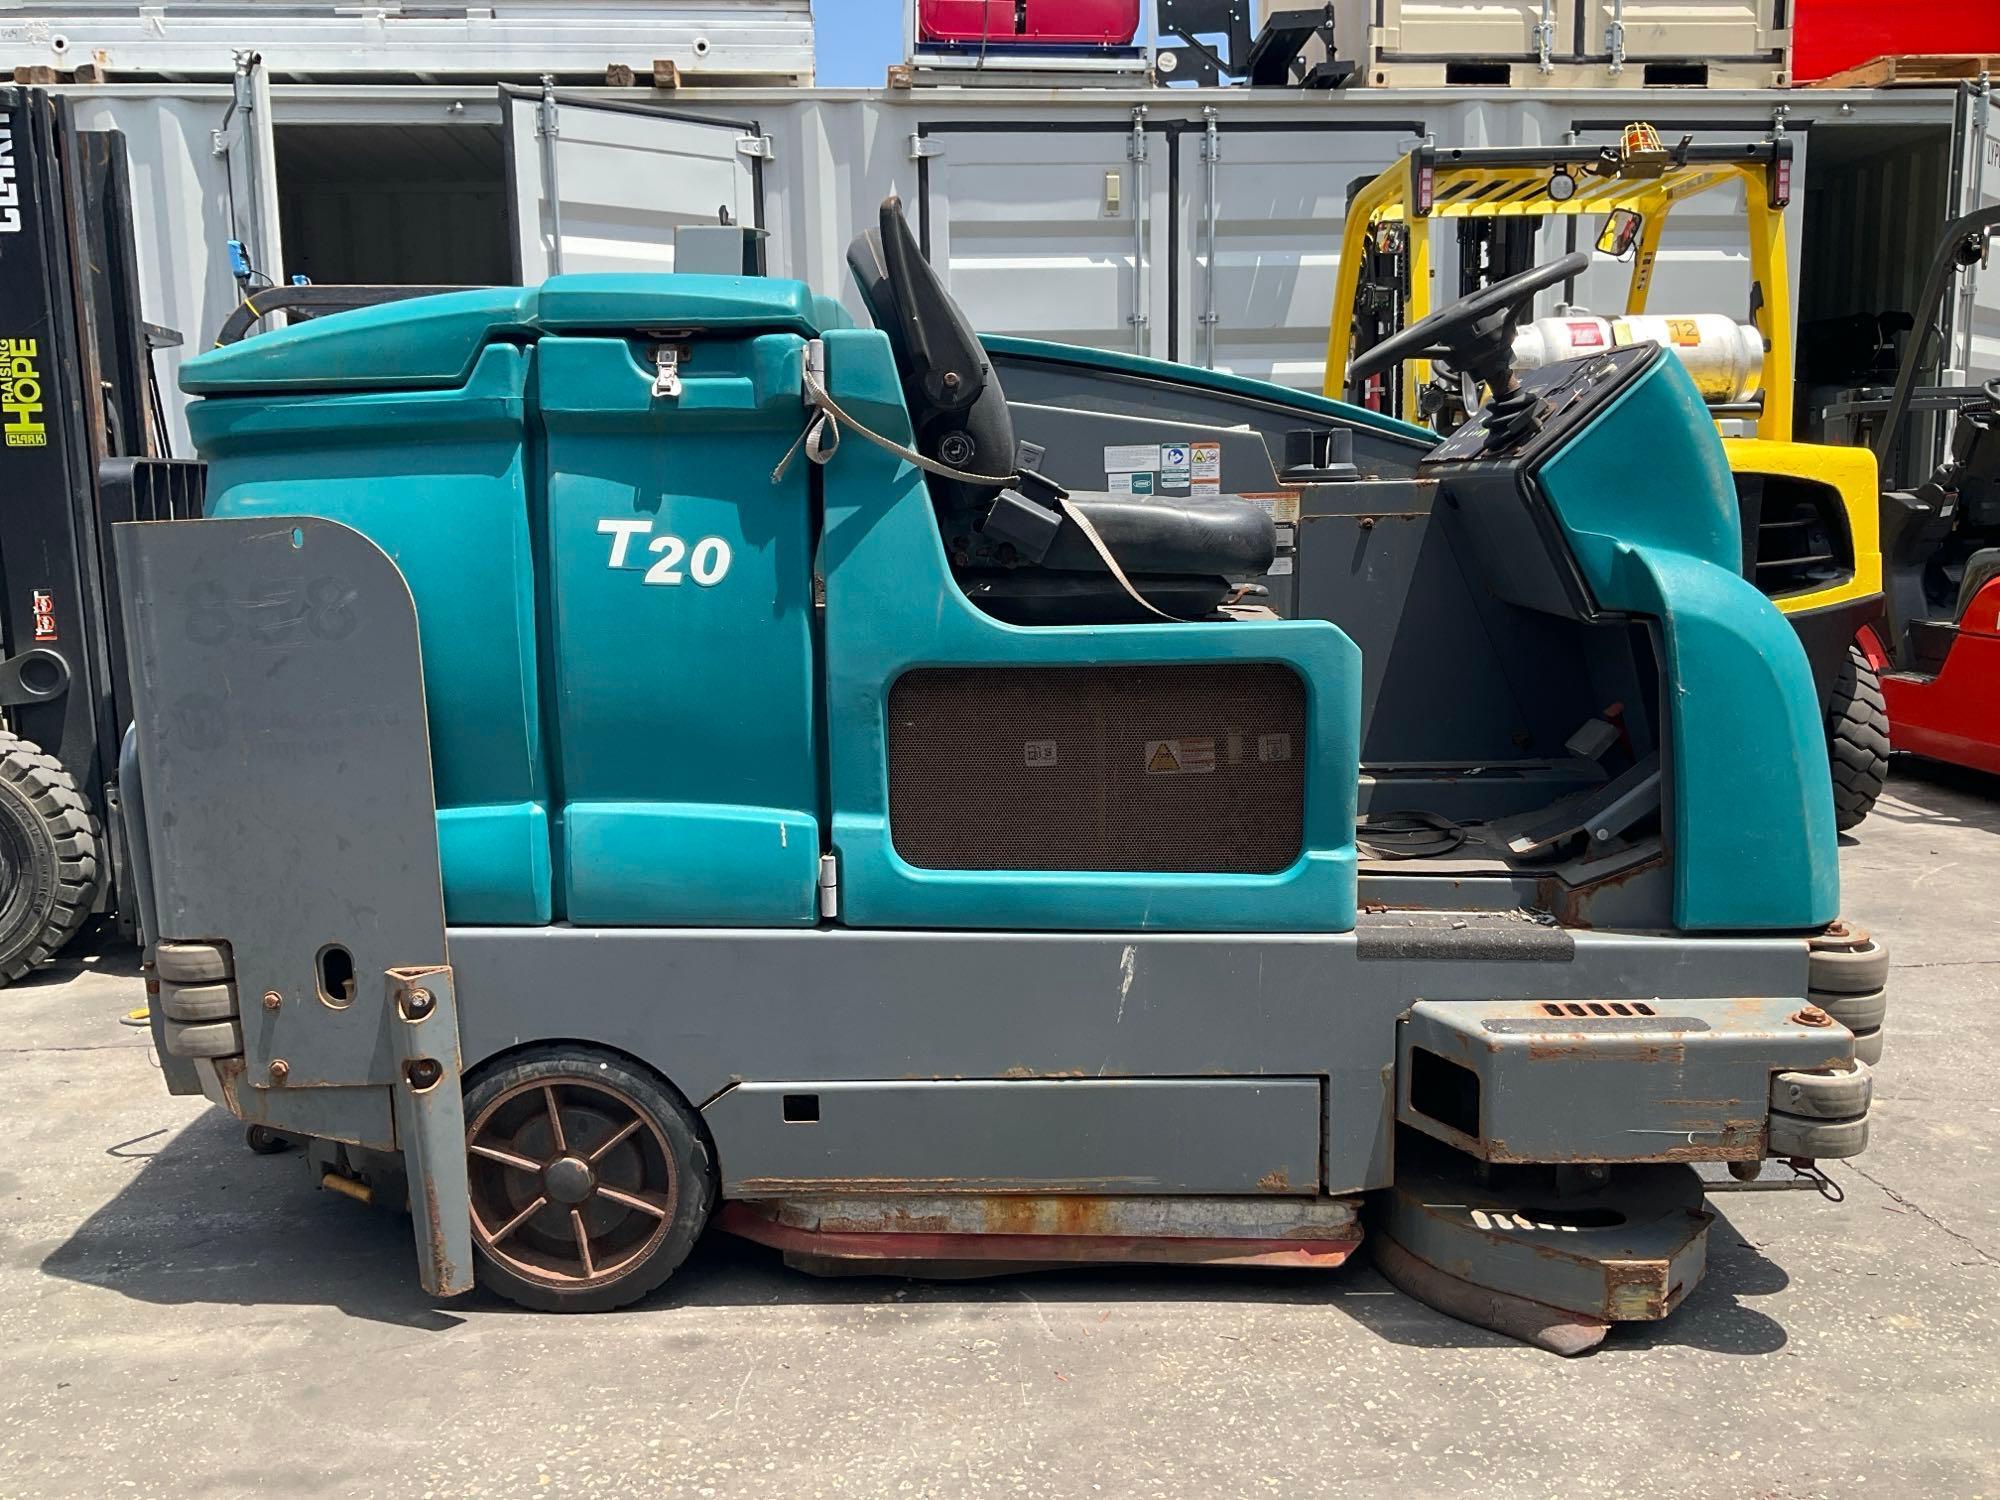 TENNANT RIDE ON SWEEPER MODEL S20, DIESEL,CONDITION UNKNOWN...